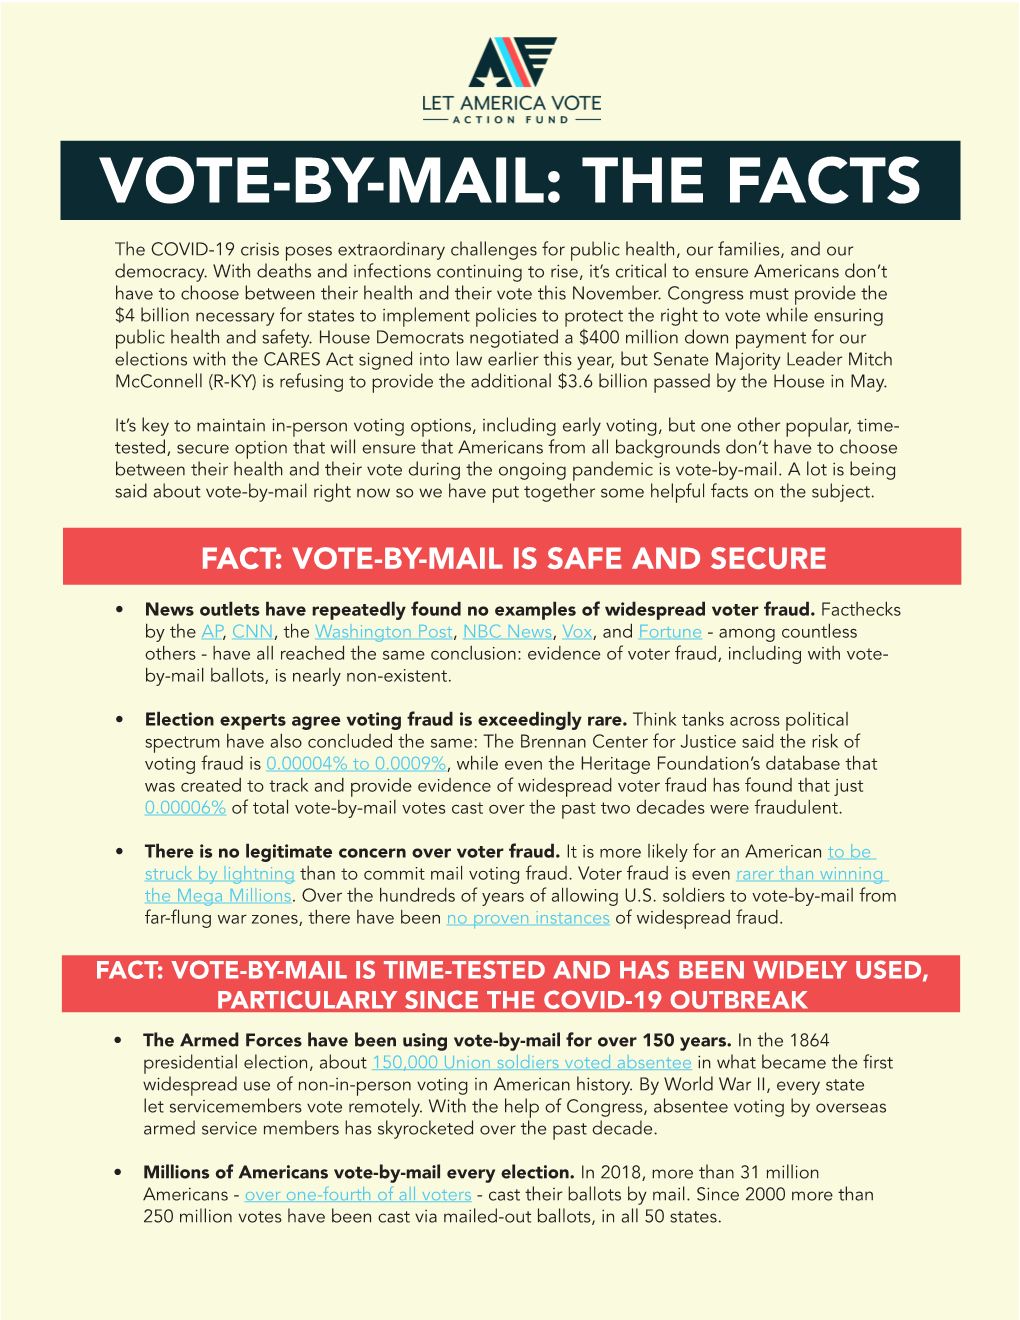 VOTE-BY-MAIL: the FACTS the COVID-19 Crisis Poses Extraordinary Challenges for Public Health, Our Families, and Our Democracy